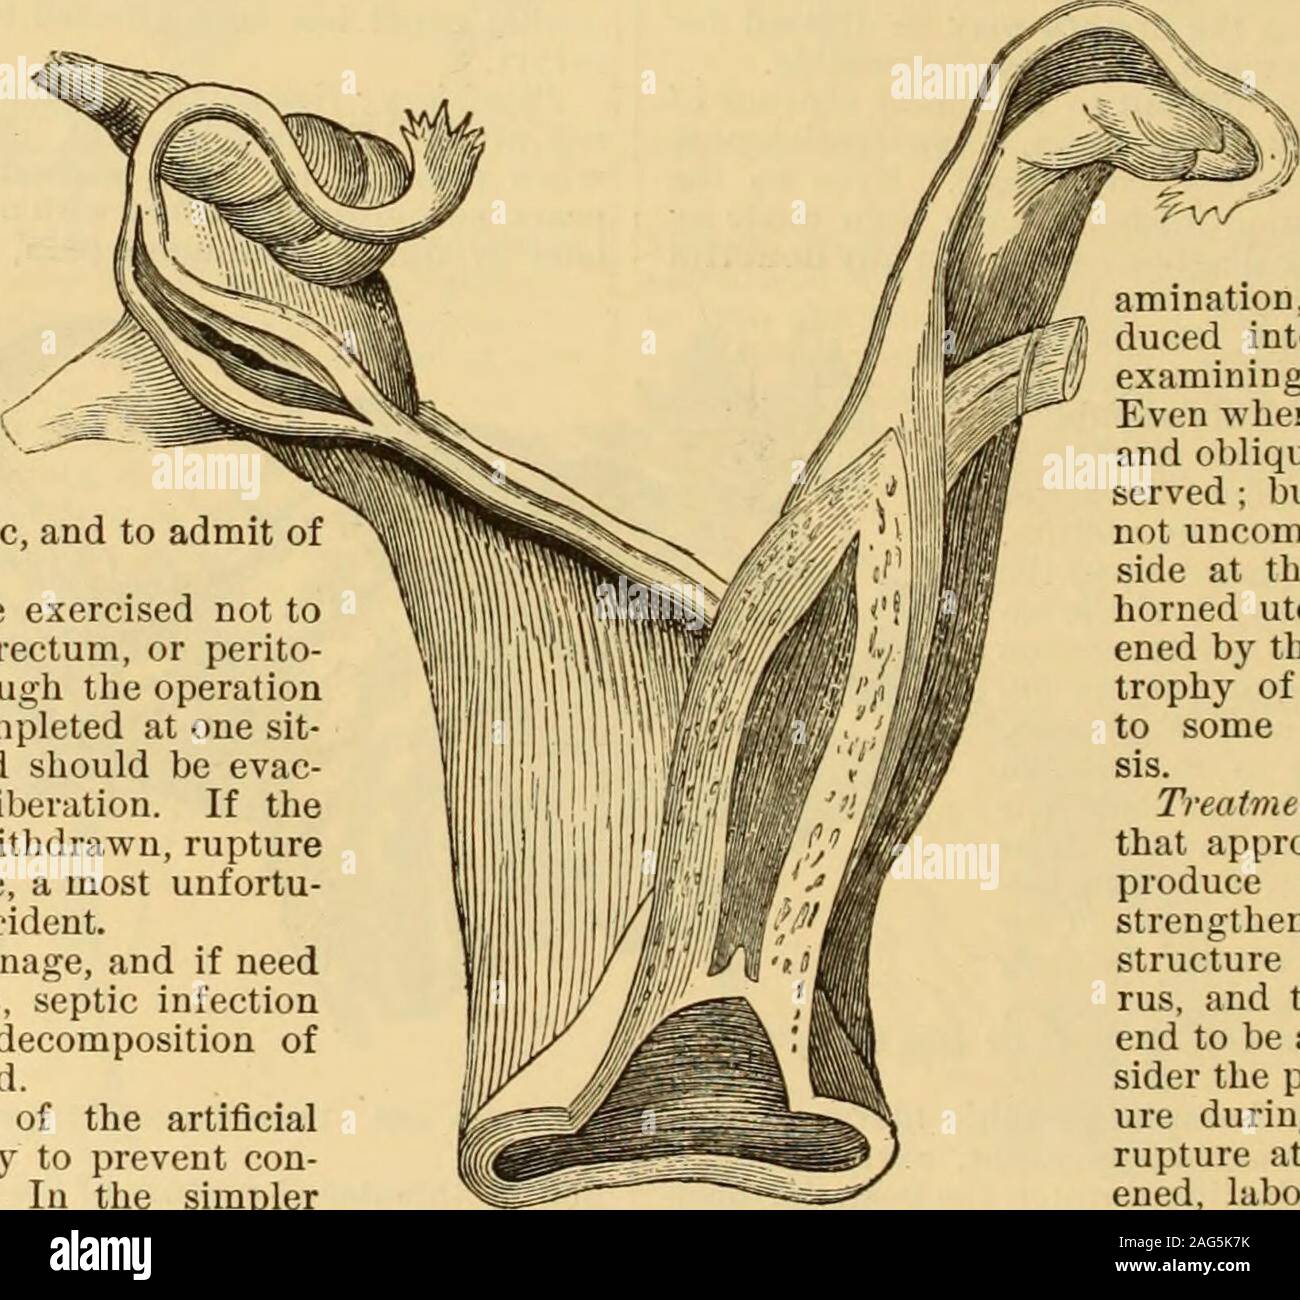 . A Reference handbook of the medical sciences : embracing the entire range of scientific and practical medicine and allied science. the uterus and oneexamining finger into the rectum.Even when impregnated its shapeand oblique position may be pre-served ; but the normal organ isnot uncommonly deflected to theside at this period, and the one-horned uterus may be so broad-ened by the physiological hyper-trophy of pregnancy as to leadto some confusion in diagno-sis. Treatment.—It is not unlikelythat appropriate treatment willproduce an enlargement andstrengthening of the muscularstructure of the Stock Photo